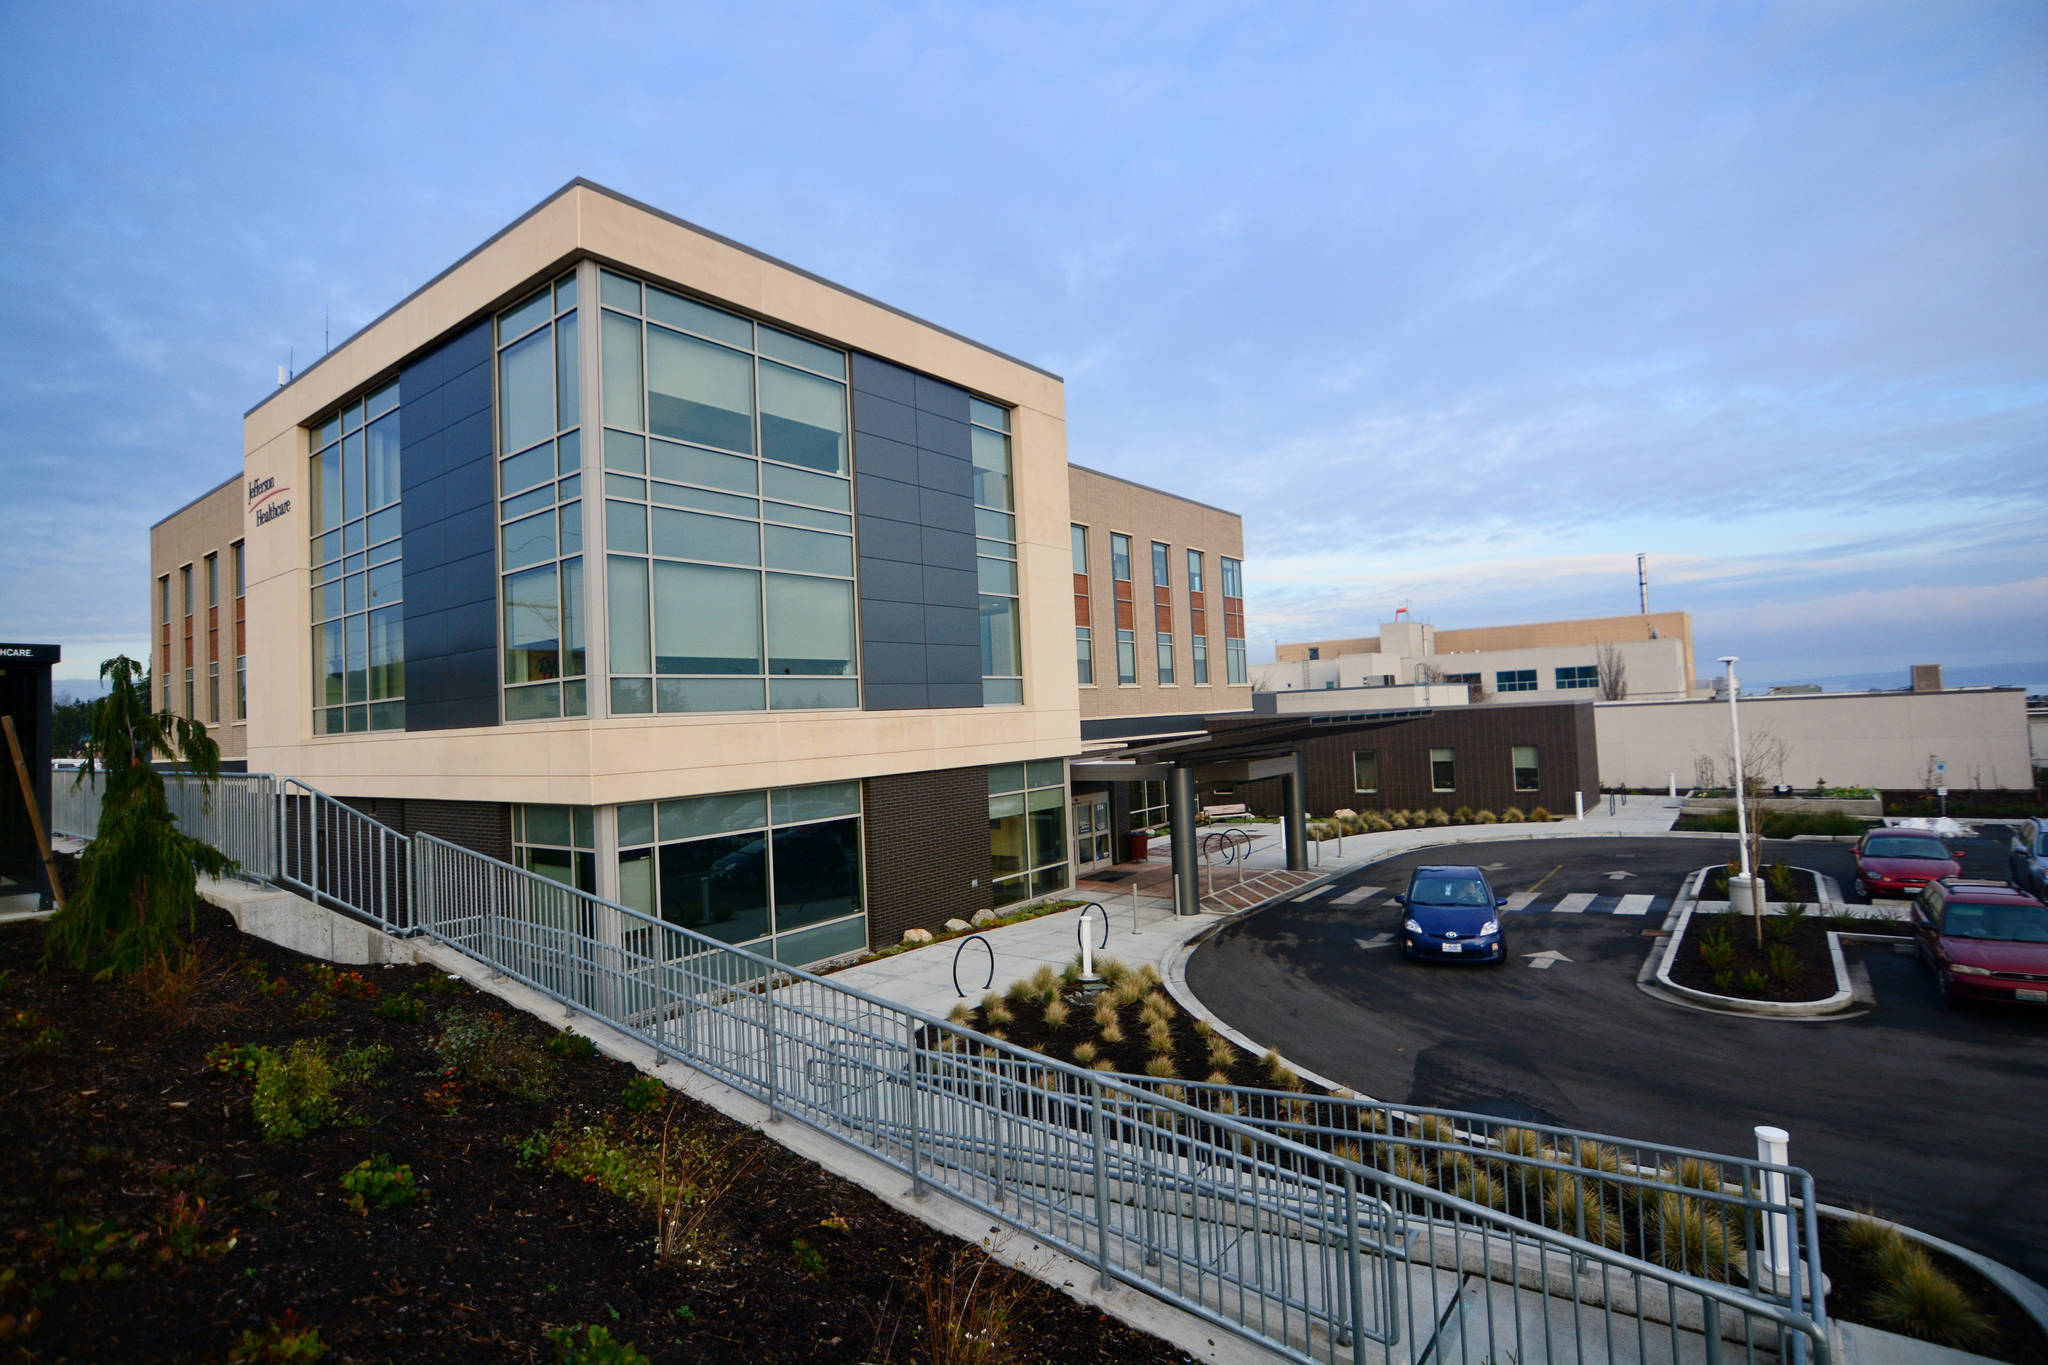 Jefferson Healthcare commissioners approved last week a $550,000 settlement that ends a dispute over the last change order for the hospital’s new Emergency and Specialty Services building that opened last year. (Jesse Major/Peninsula Daily News)